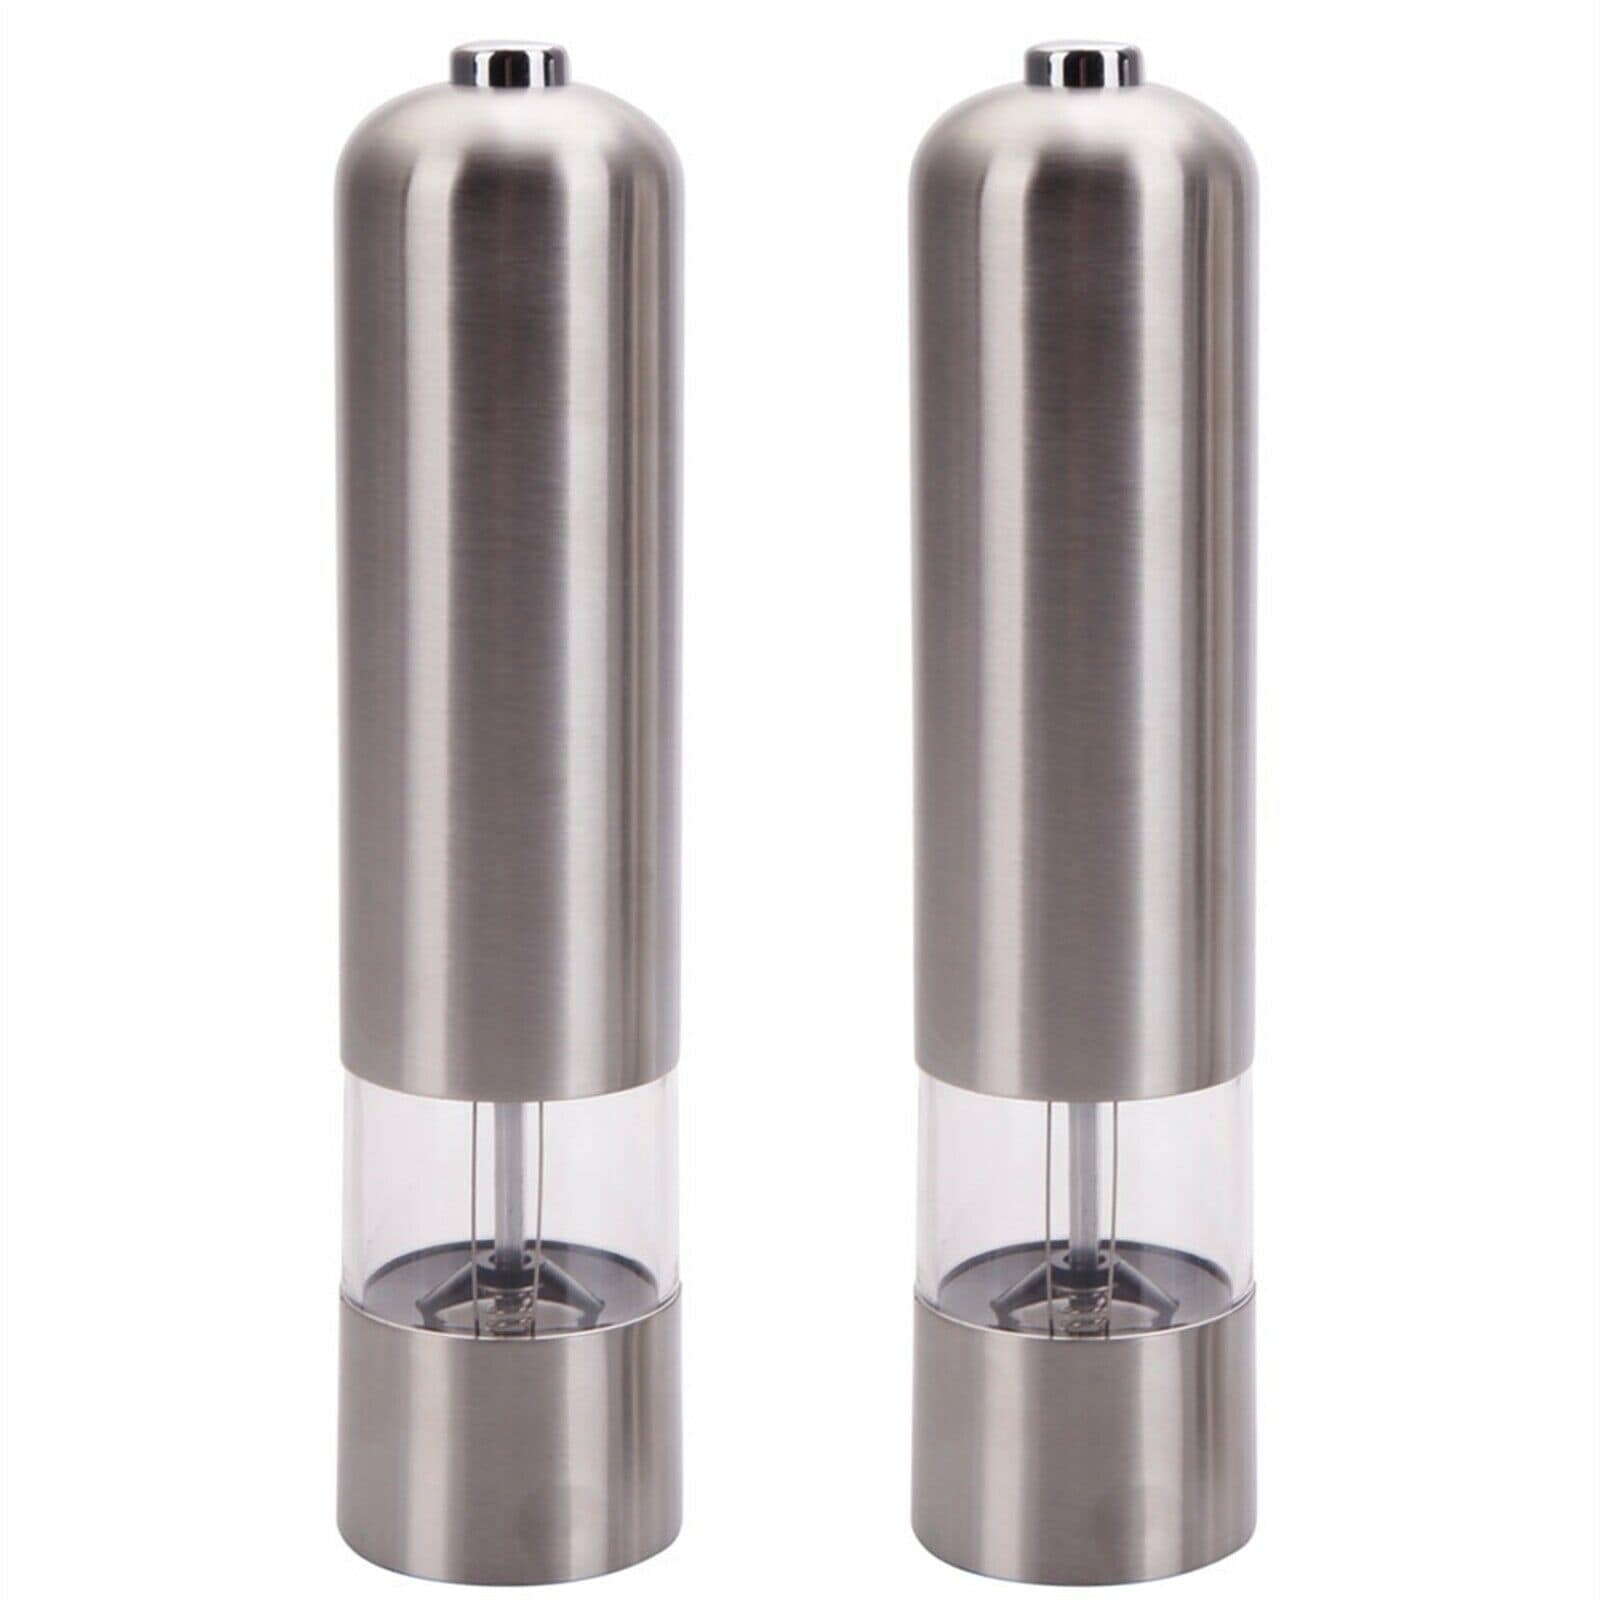 https://ak1.ostkcdn.com/images/products/is/images/direct/6aa0850c499367b3b3dca1f5b78907f488ab23e1/Stainless-Steel-Electric-Pepper-Mill-2PCS.jpg